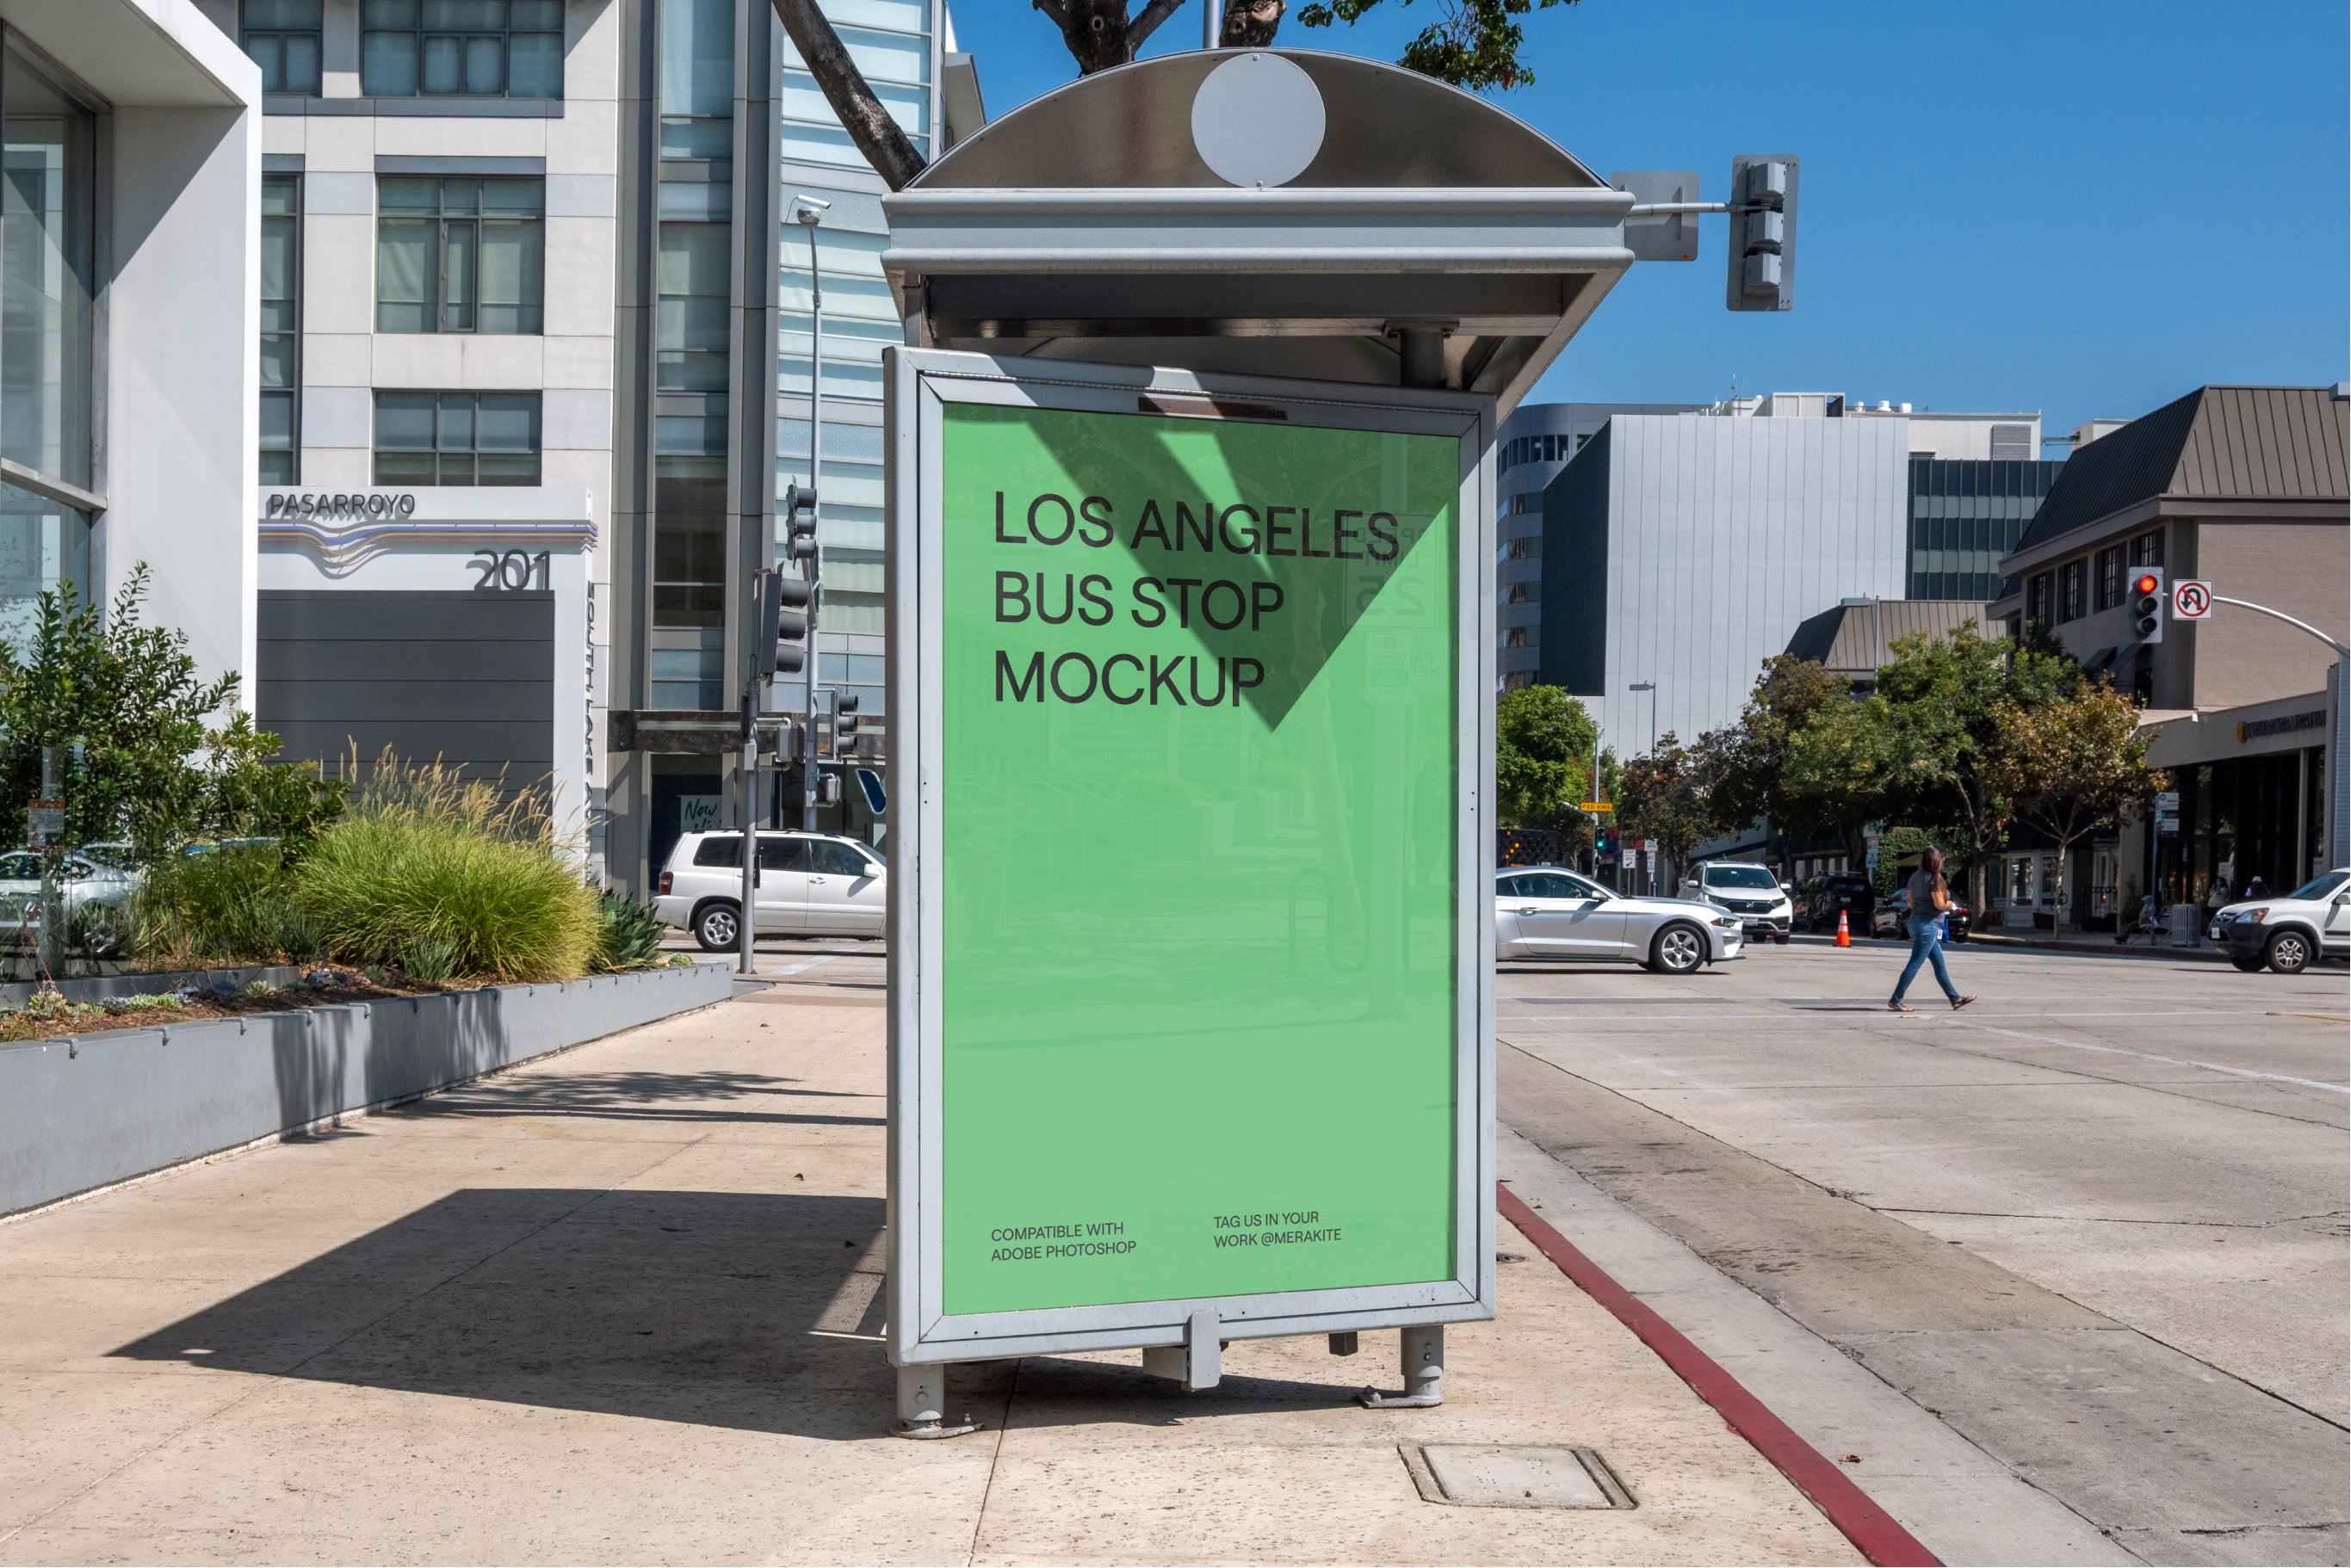 Downtown City Urban Bus Stop Mockup cover image.